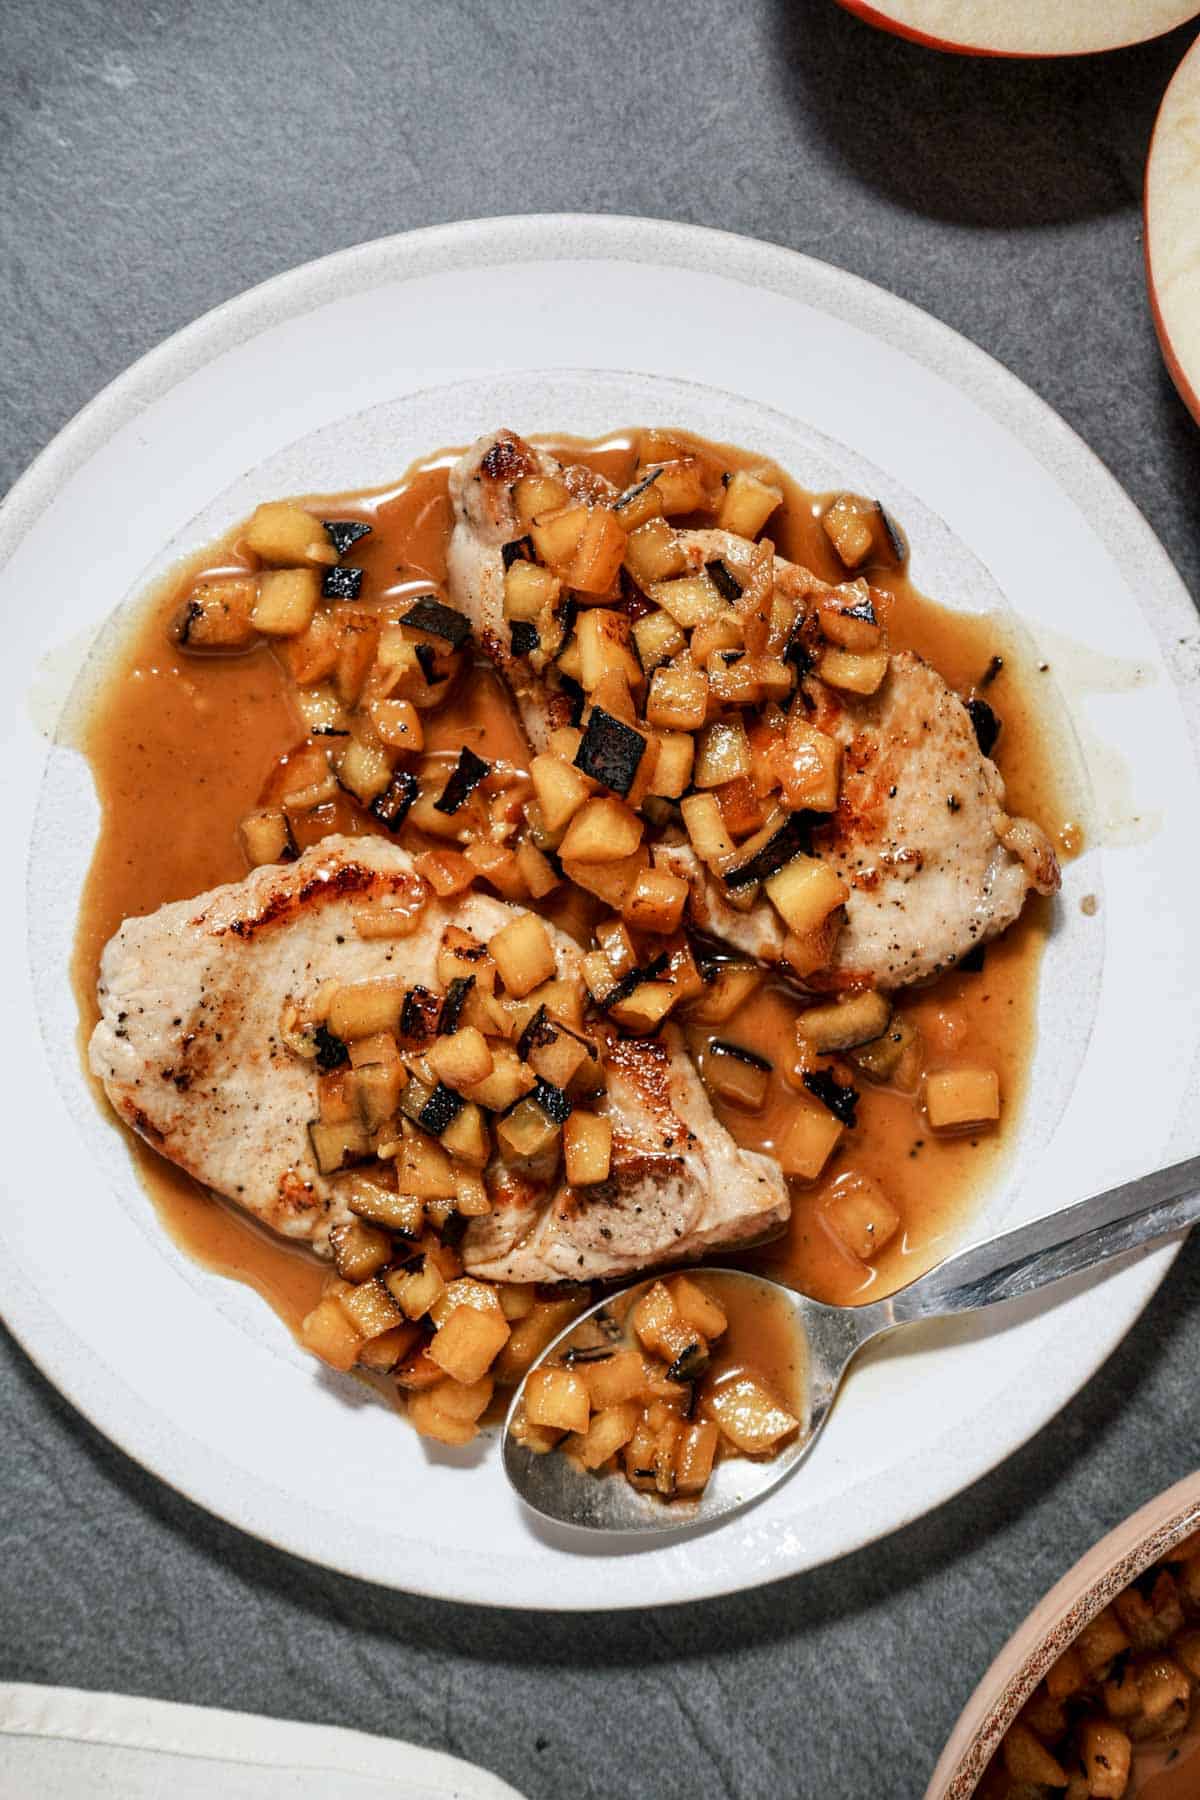 2 pork chops on a plate with apple brandy sauce (orange colored)